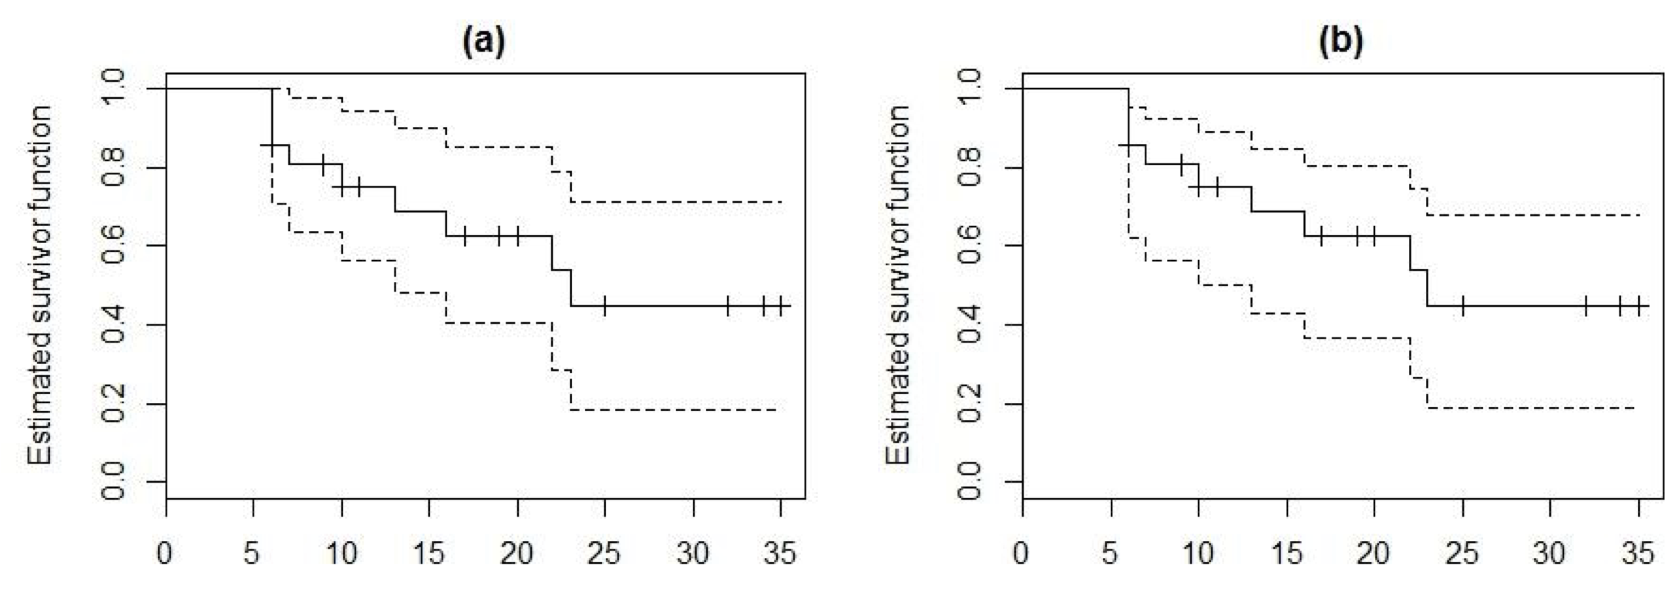 Kaplan-Meier survival curve (solid line) and 95-percent confidence limits (dotted lines) for leukaemia patients in the treatment group. (a) using Greenwoods formula, (b) using the alternative confidence limits.